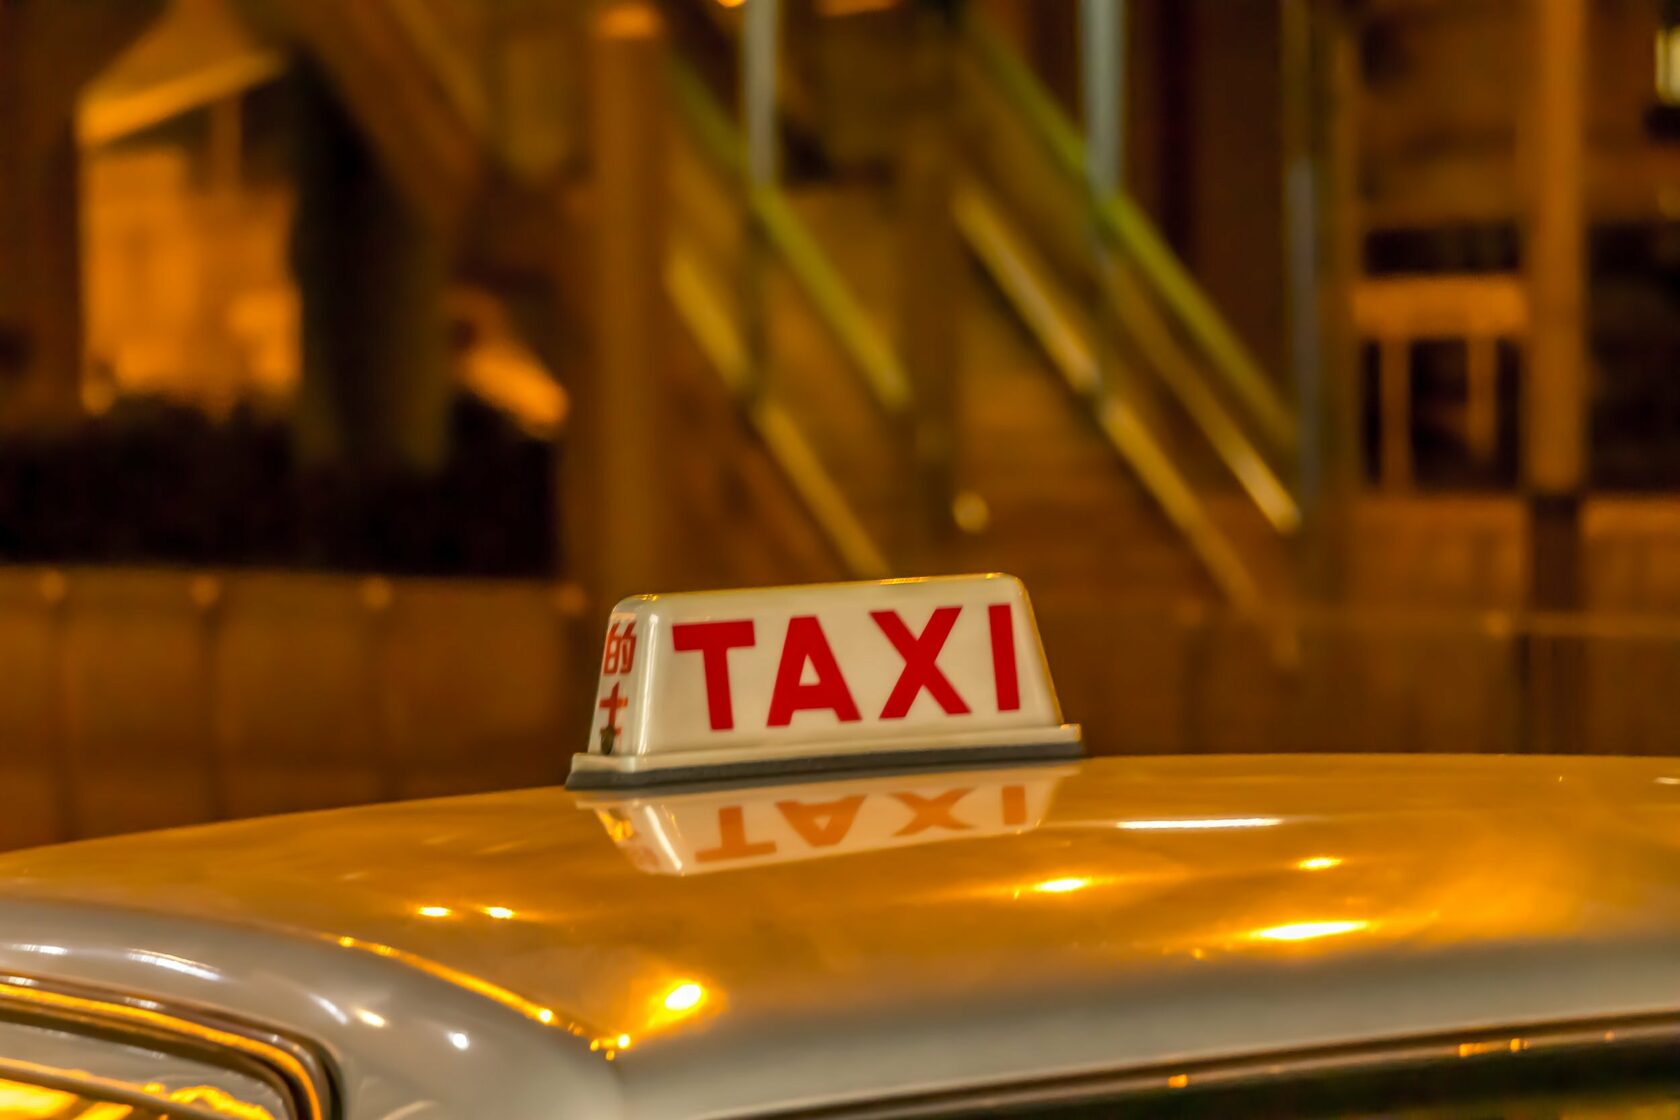 Guide-to-using-montenegro-taxi-for-beginners-taxi-directory-app-to-keep